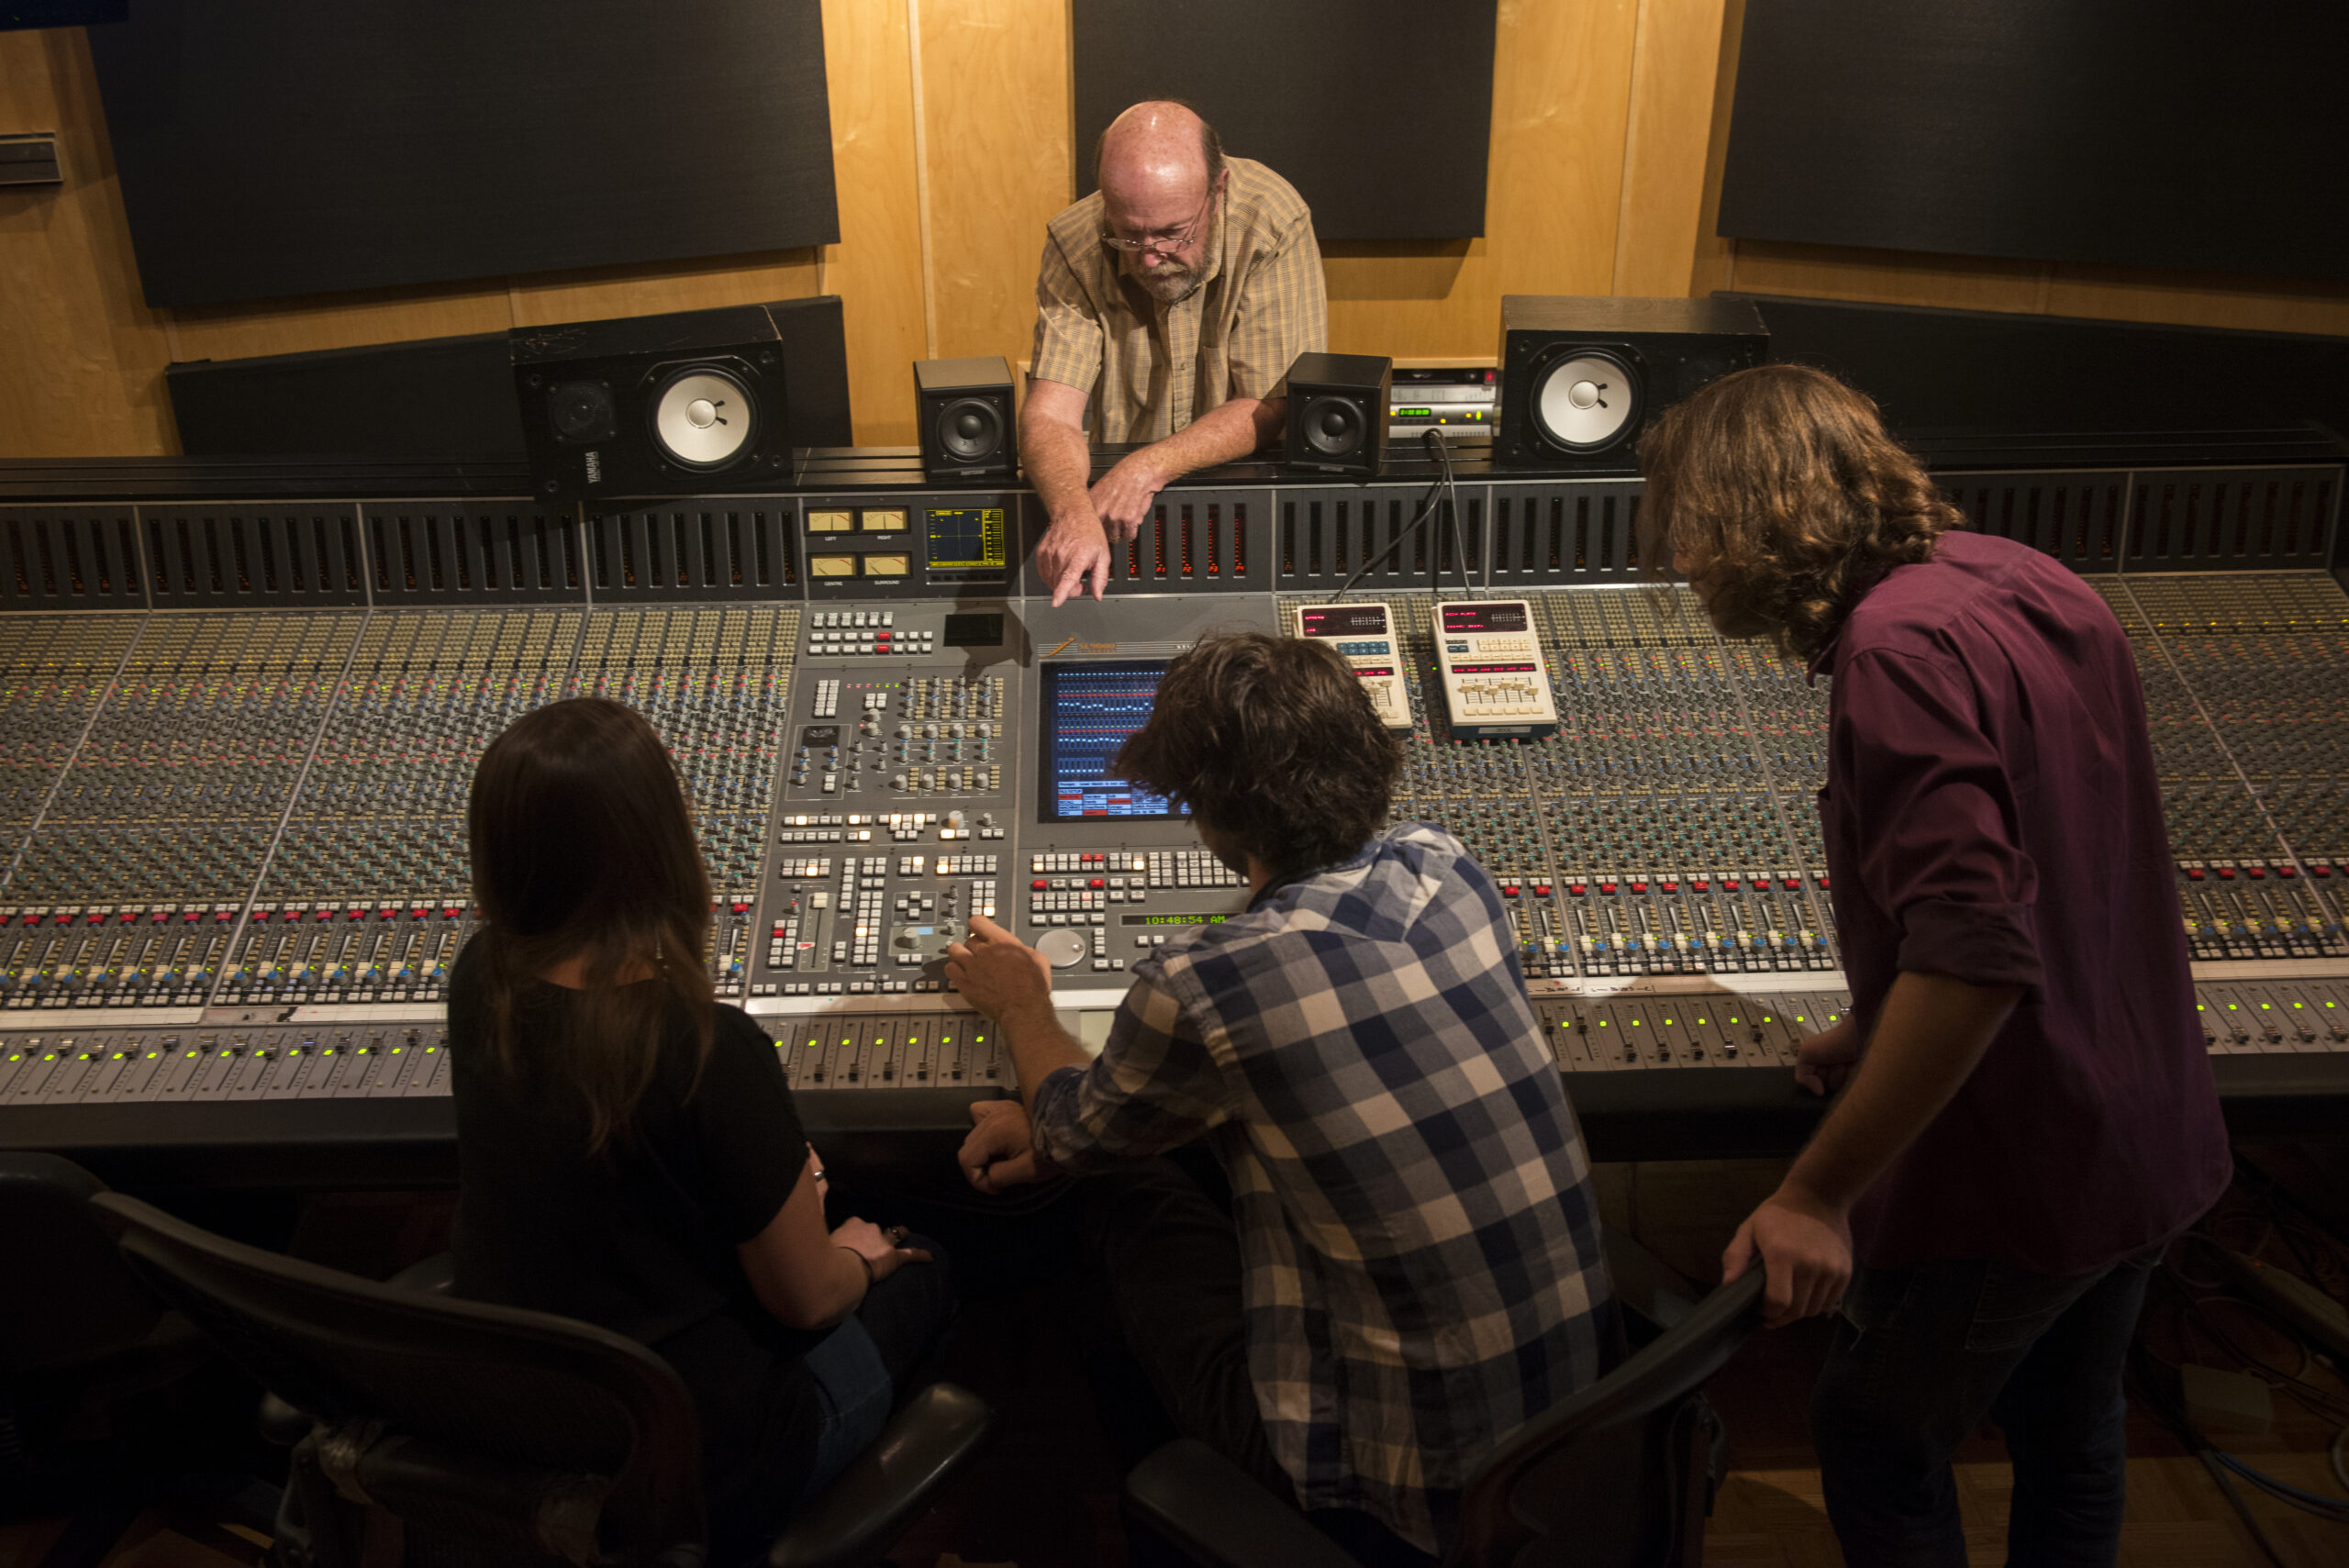 2015: USC Thornton Music Technology professor Richard McIlvery guides a student through learning about a modern recording studio.